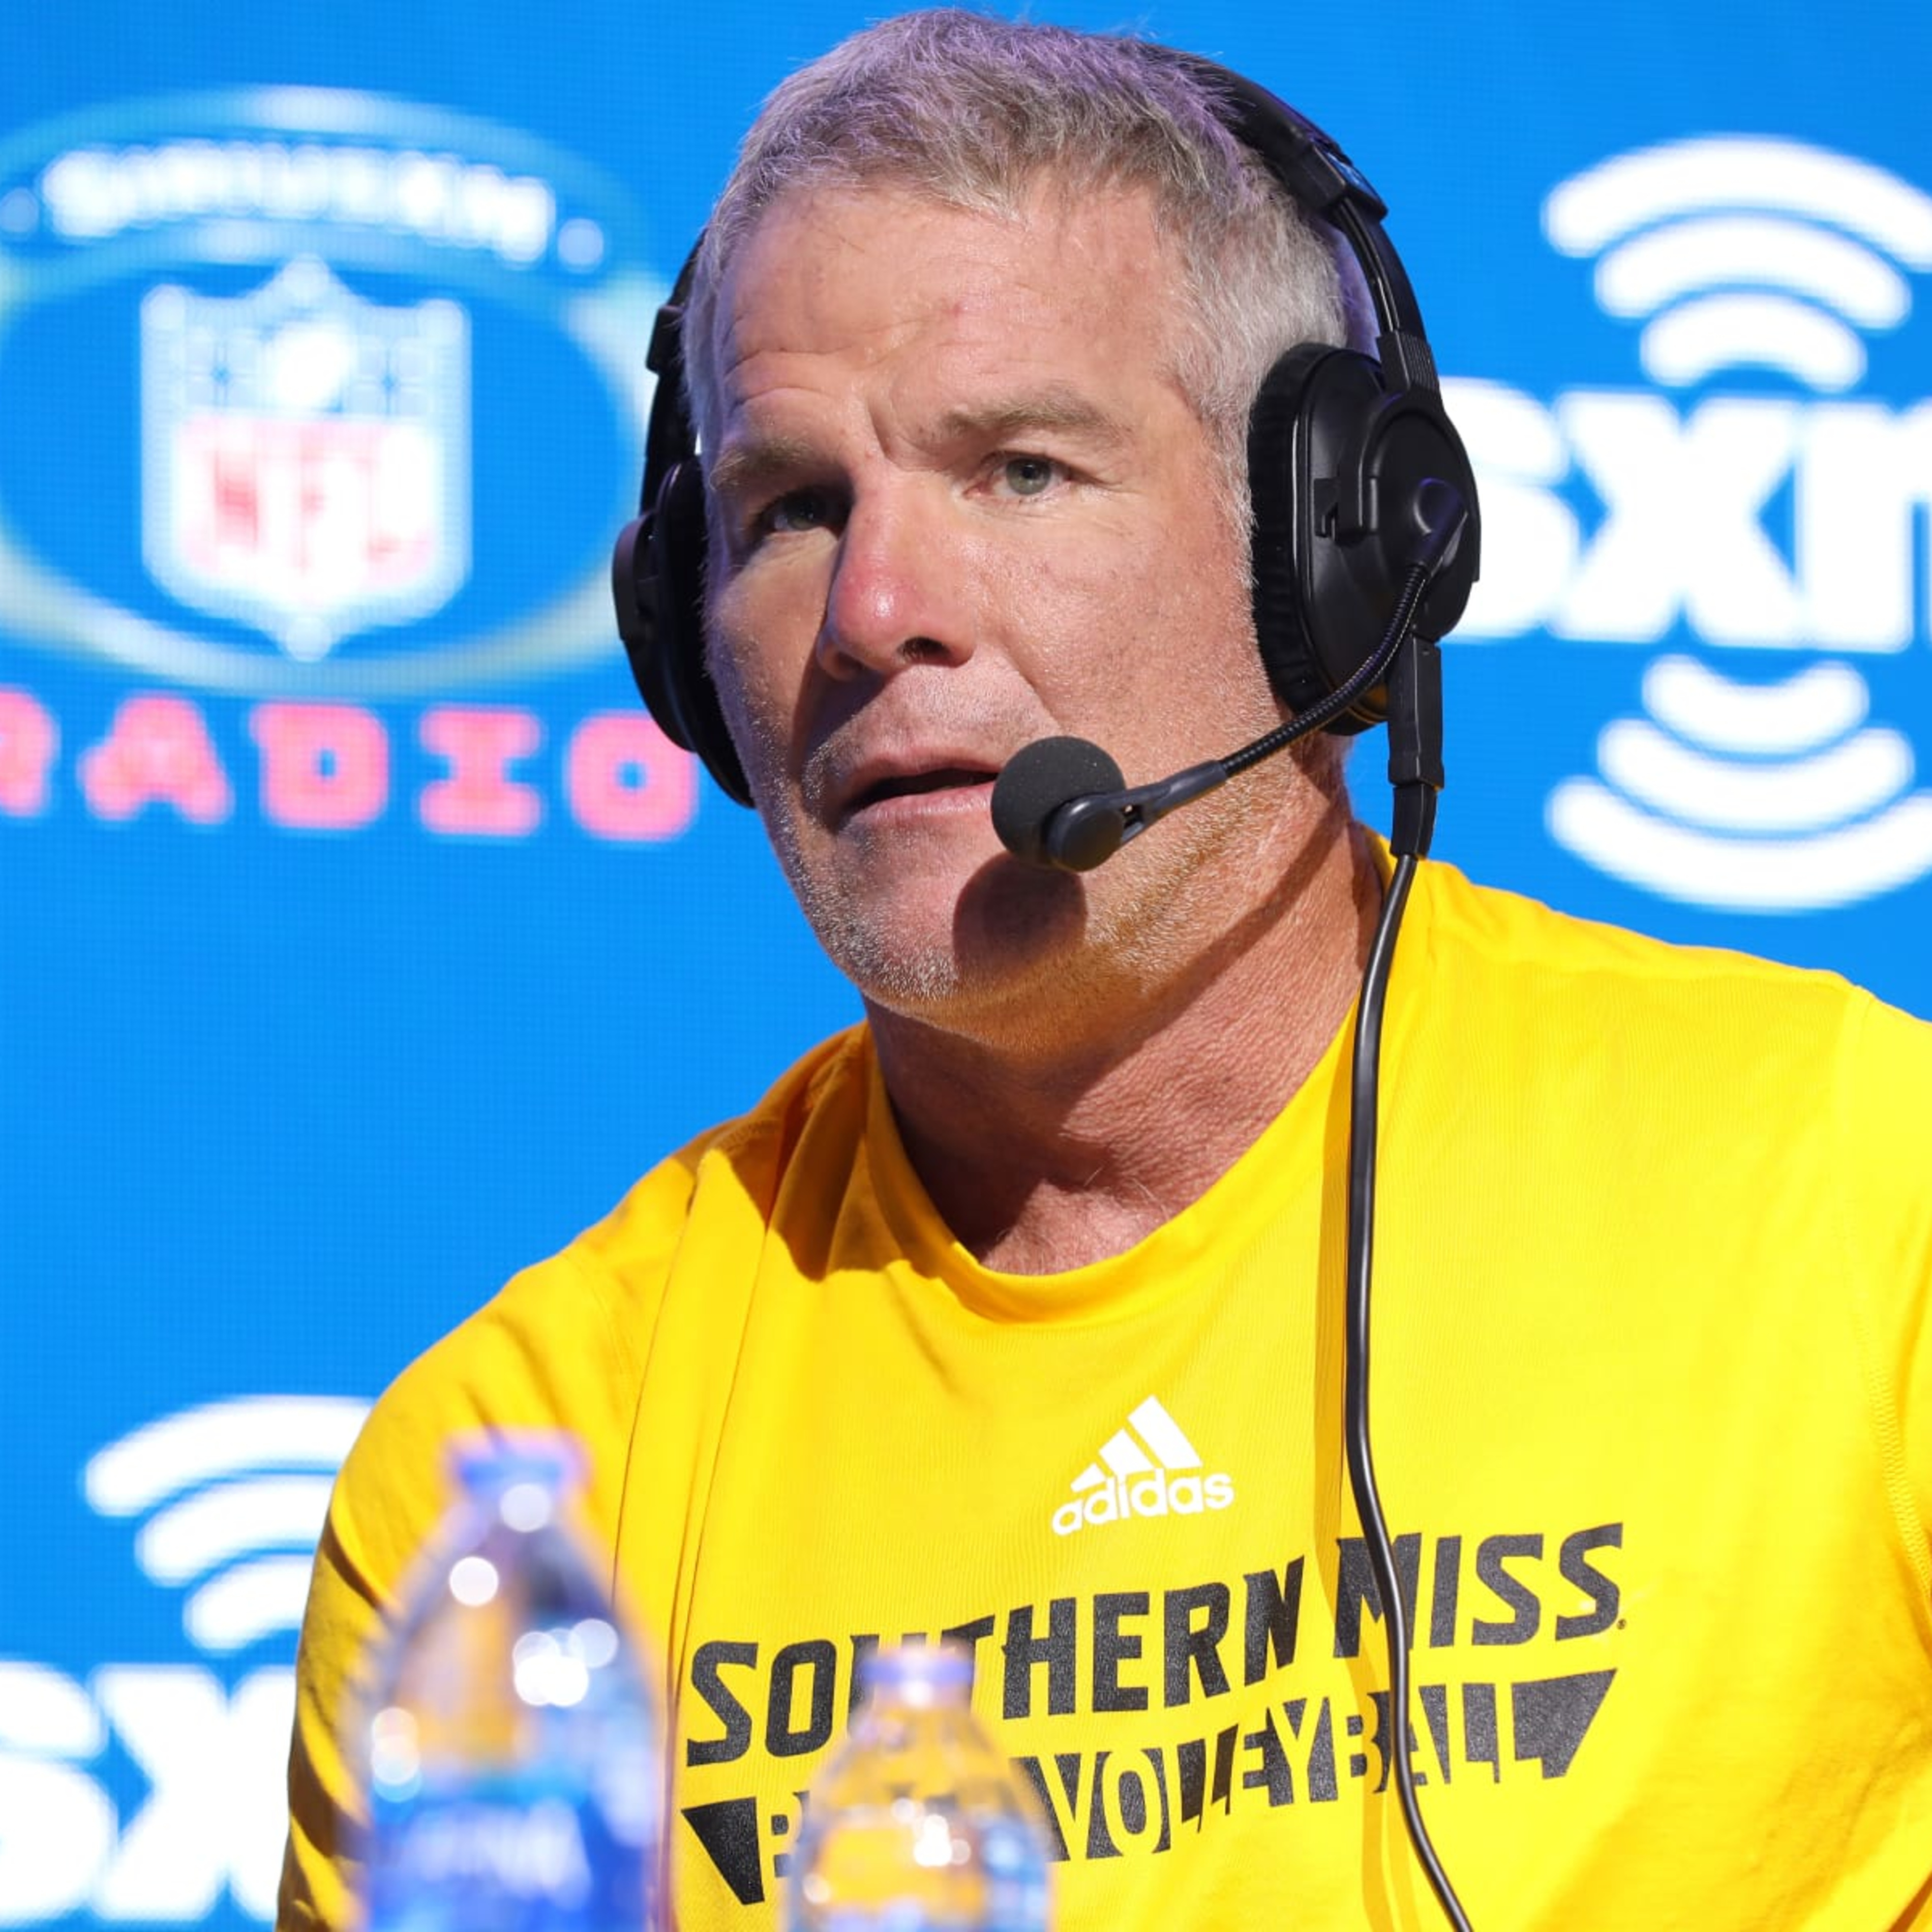 Brett Favre Welfare Payments Ordered by Former Governor, Defendant Nancy New Alleges